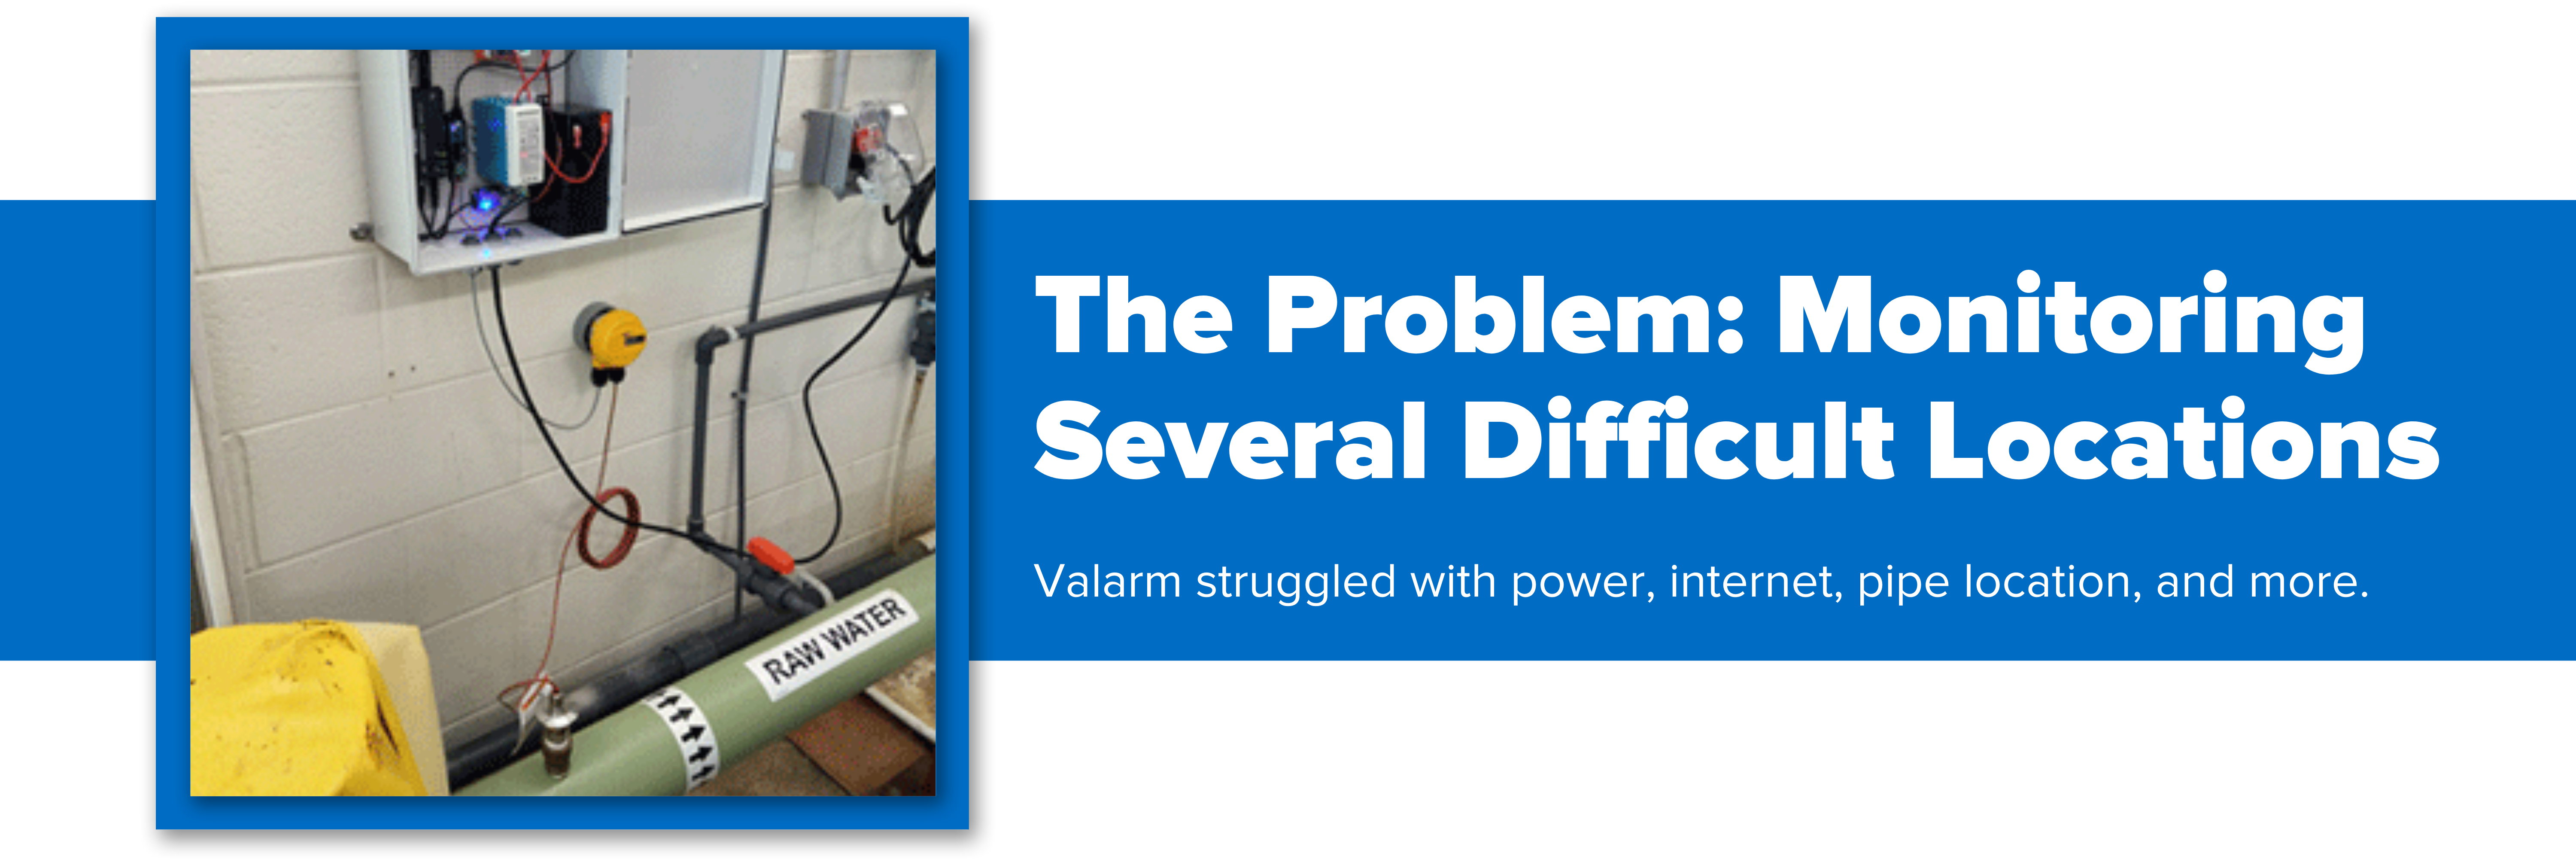 Header image with text "The Problem: Monitoring Several Difficult Locations"